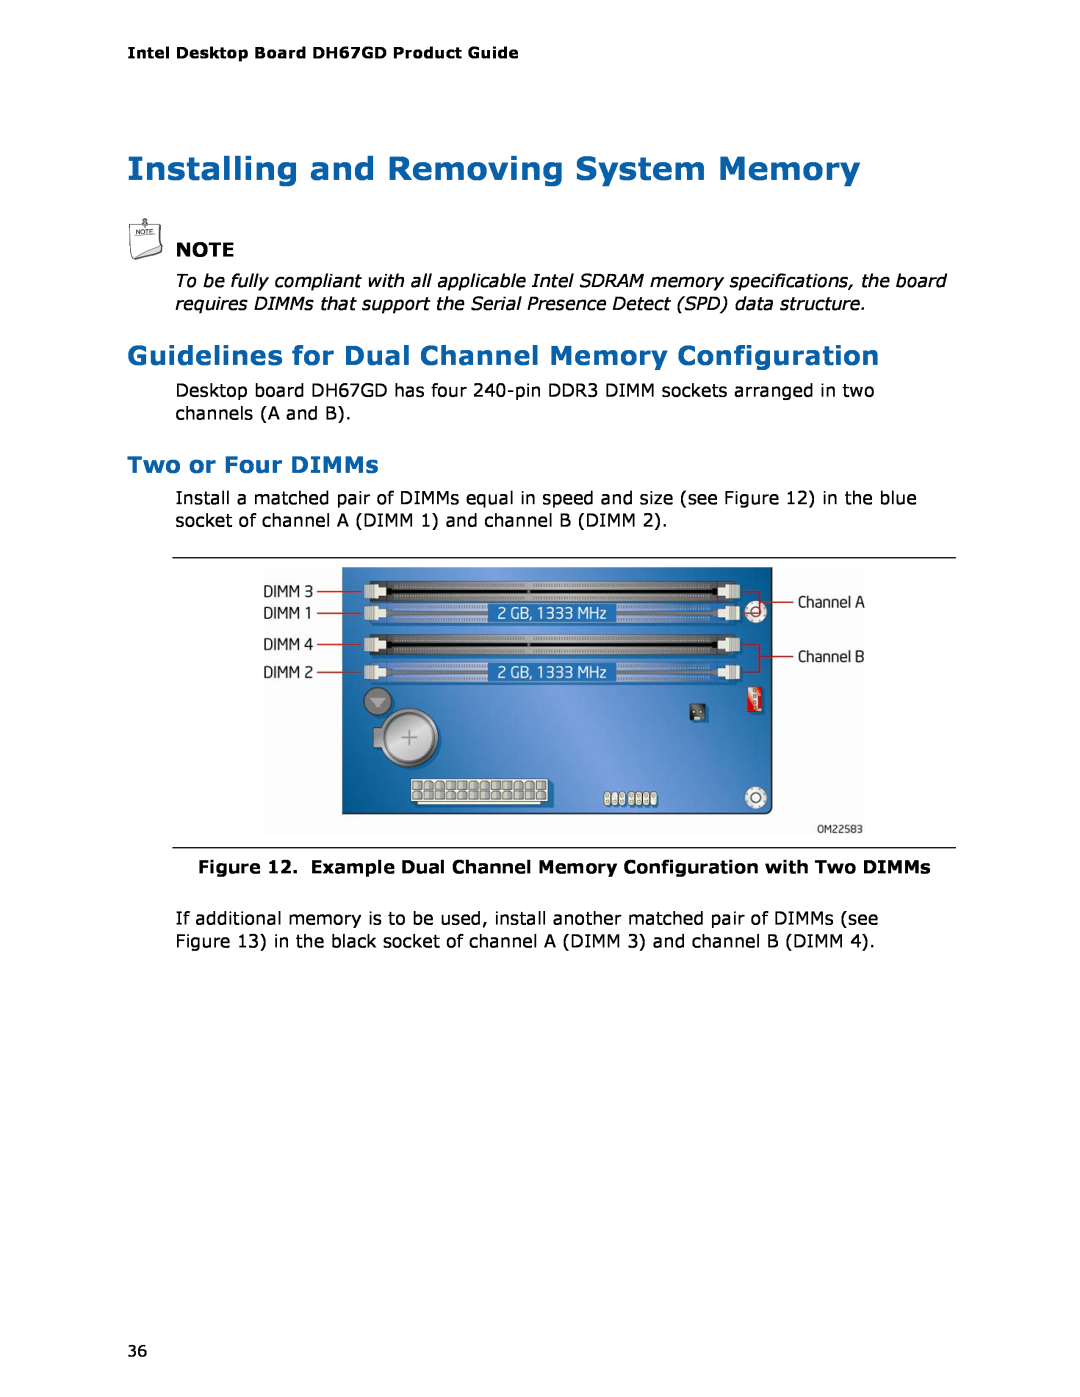 Intel DH67GD Installing and Removing System Memory, Guidelines for Dual Channel Memory Configuration, Two or Four DIMMs 